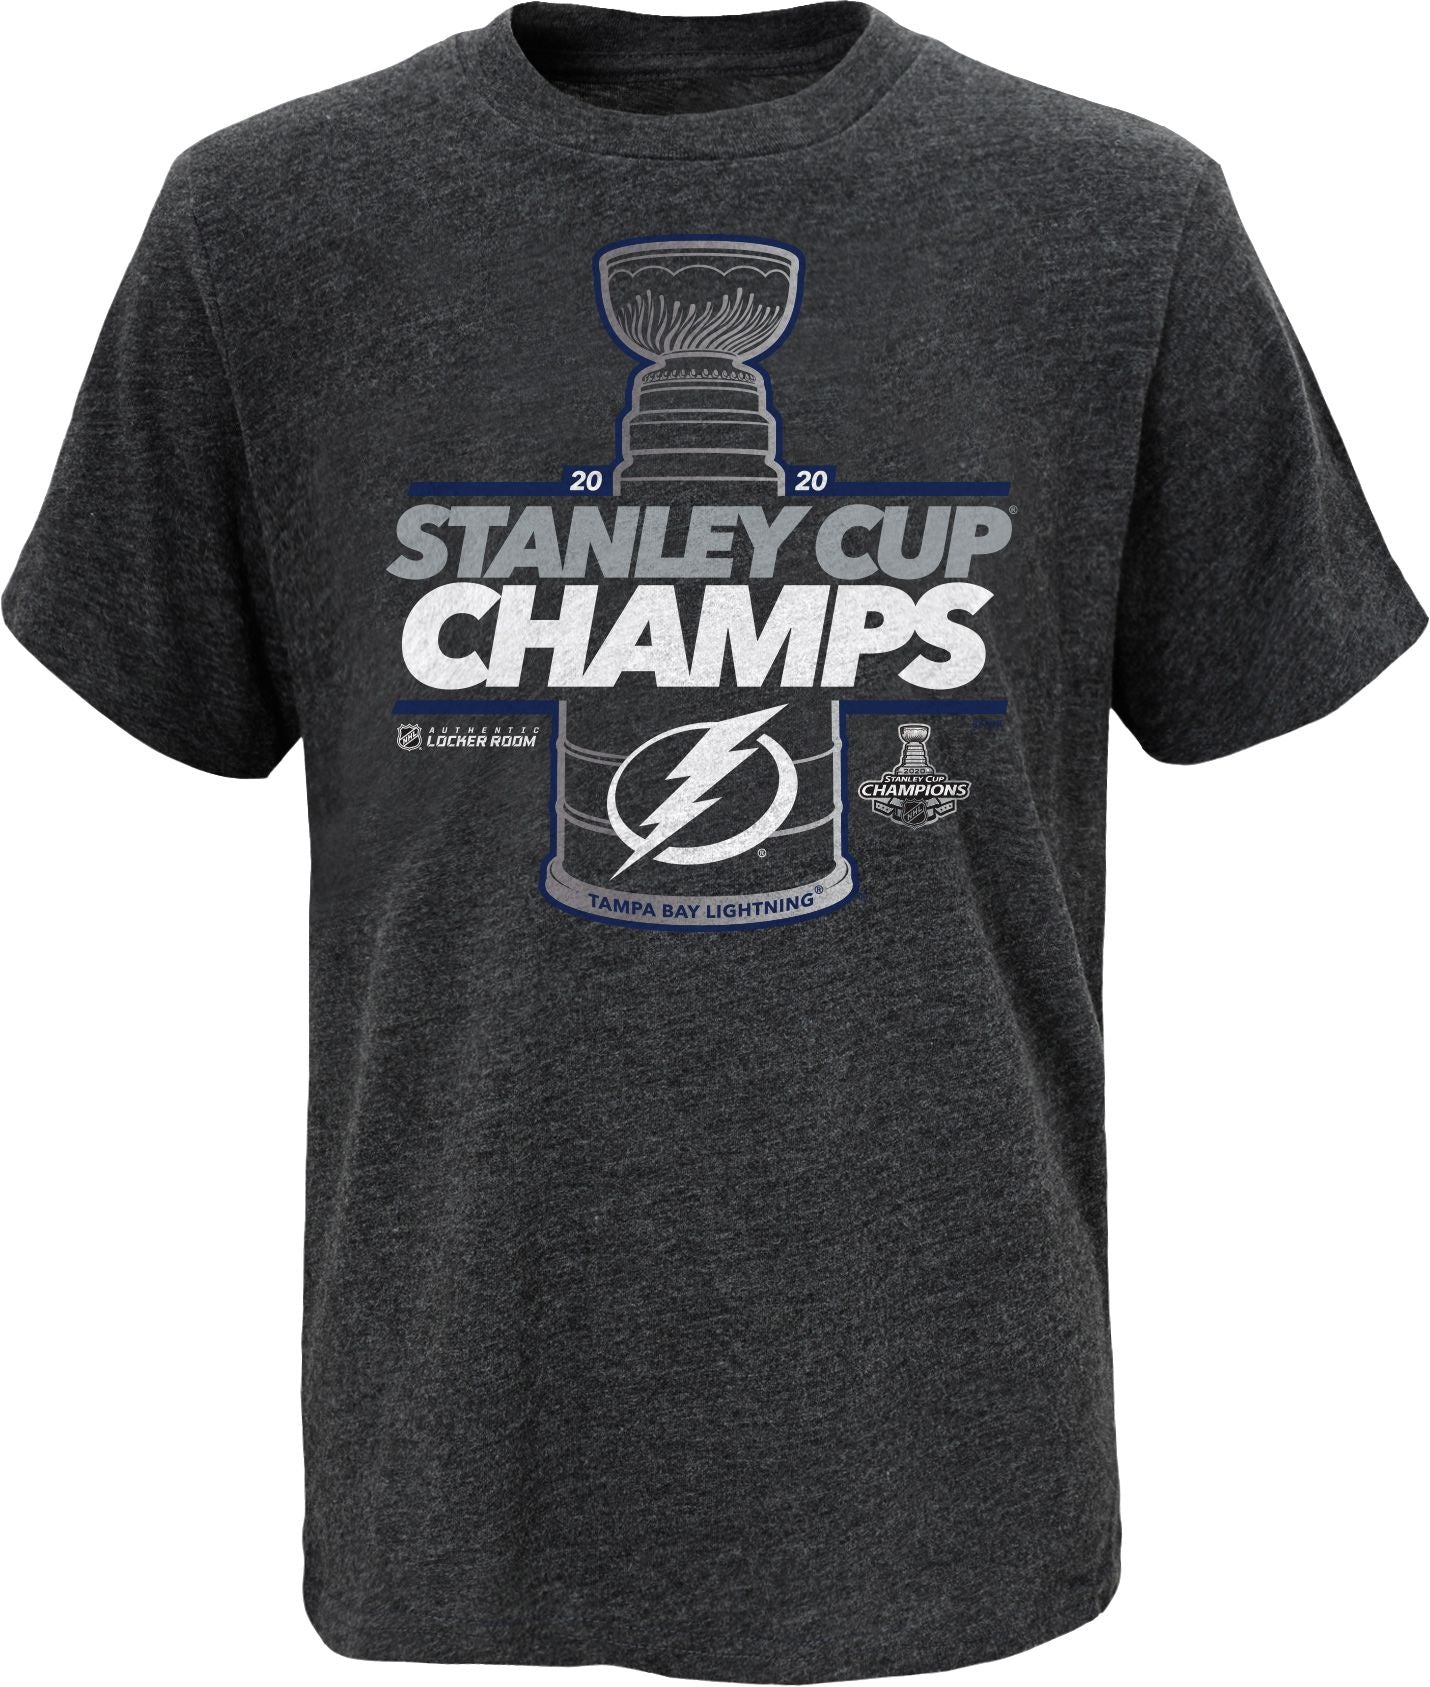 Authentic Nhl Apparel Youth Tampa Bay Lightning Stanley Cup Champs Locker Room T-Shirt